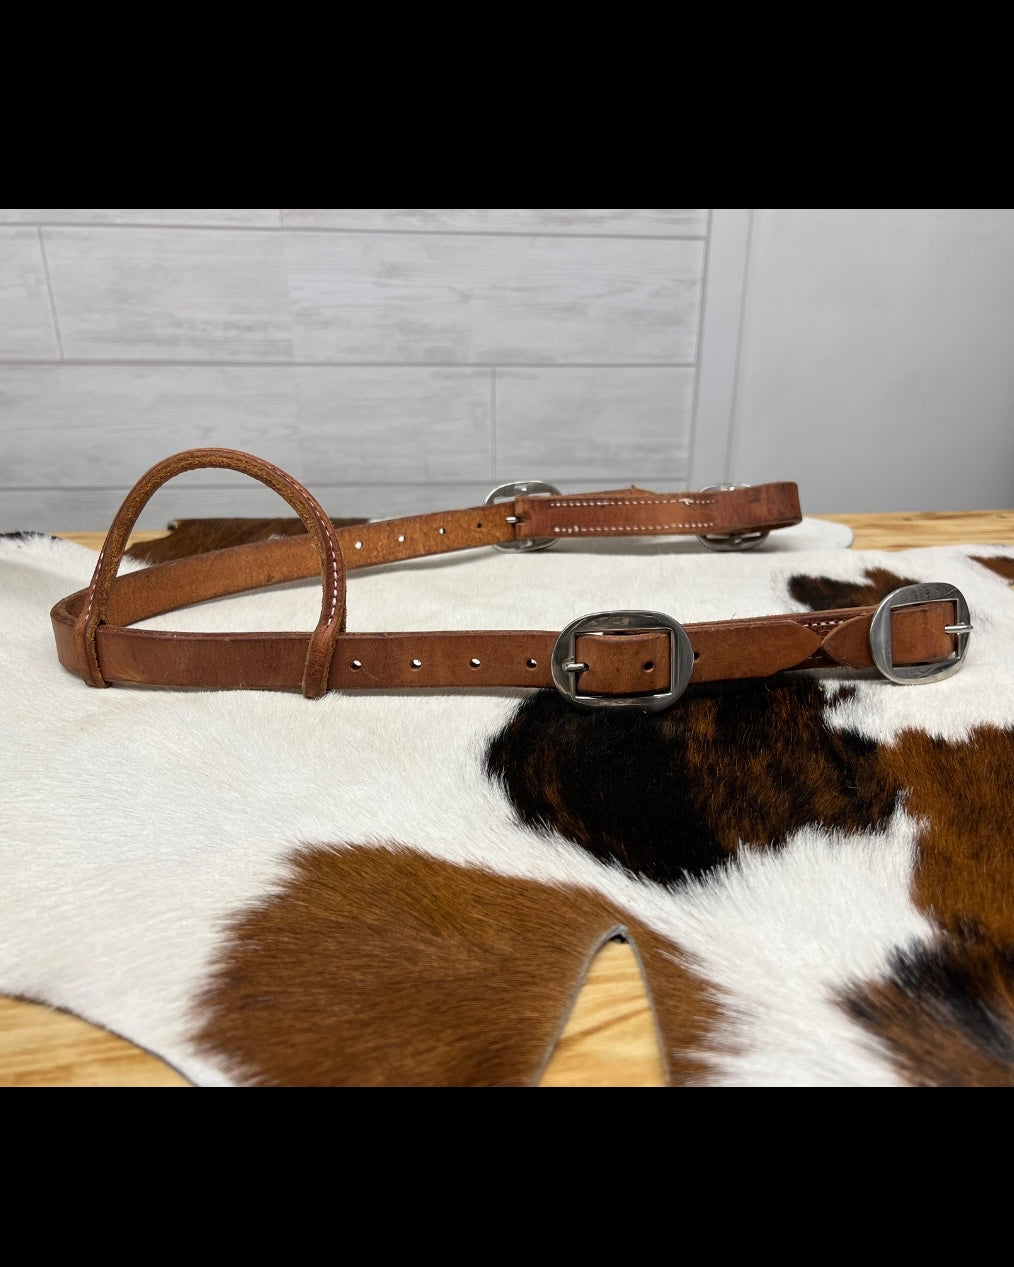 One Ear Buckle End 1" Headstall - Not Oiled